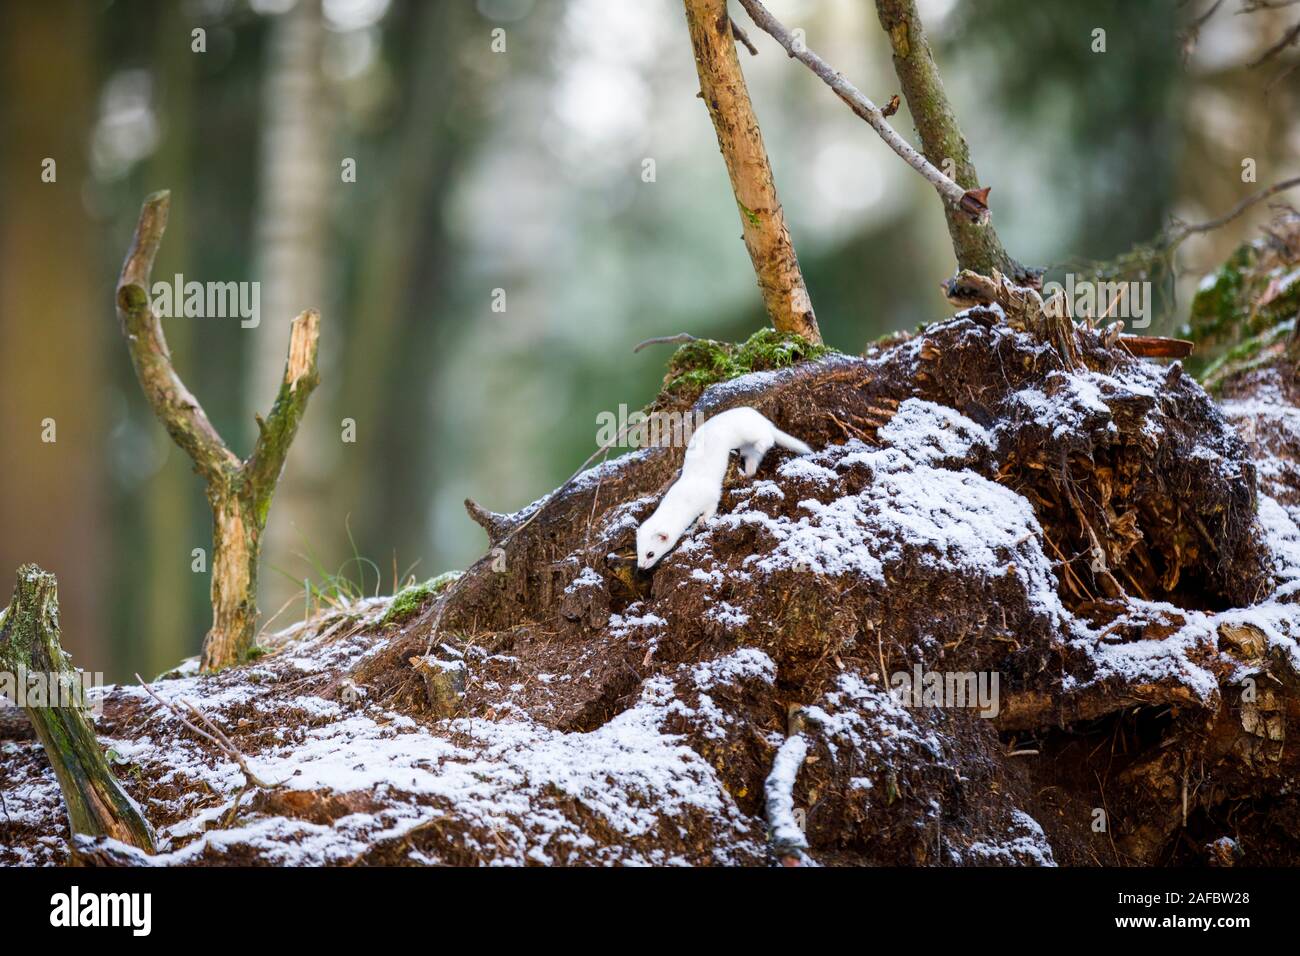 Small white least weasel on an old tree stump in winter forest Stock Photo